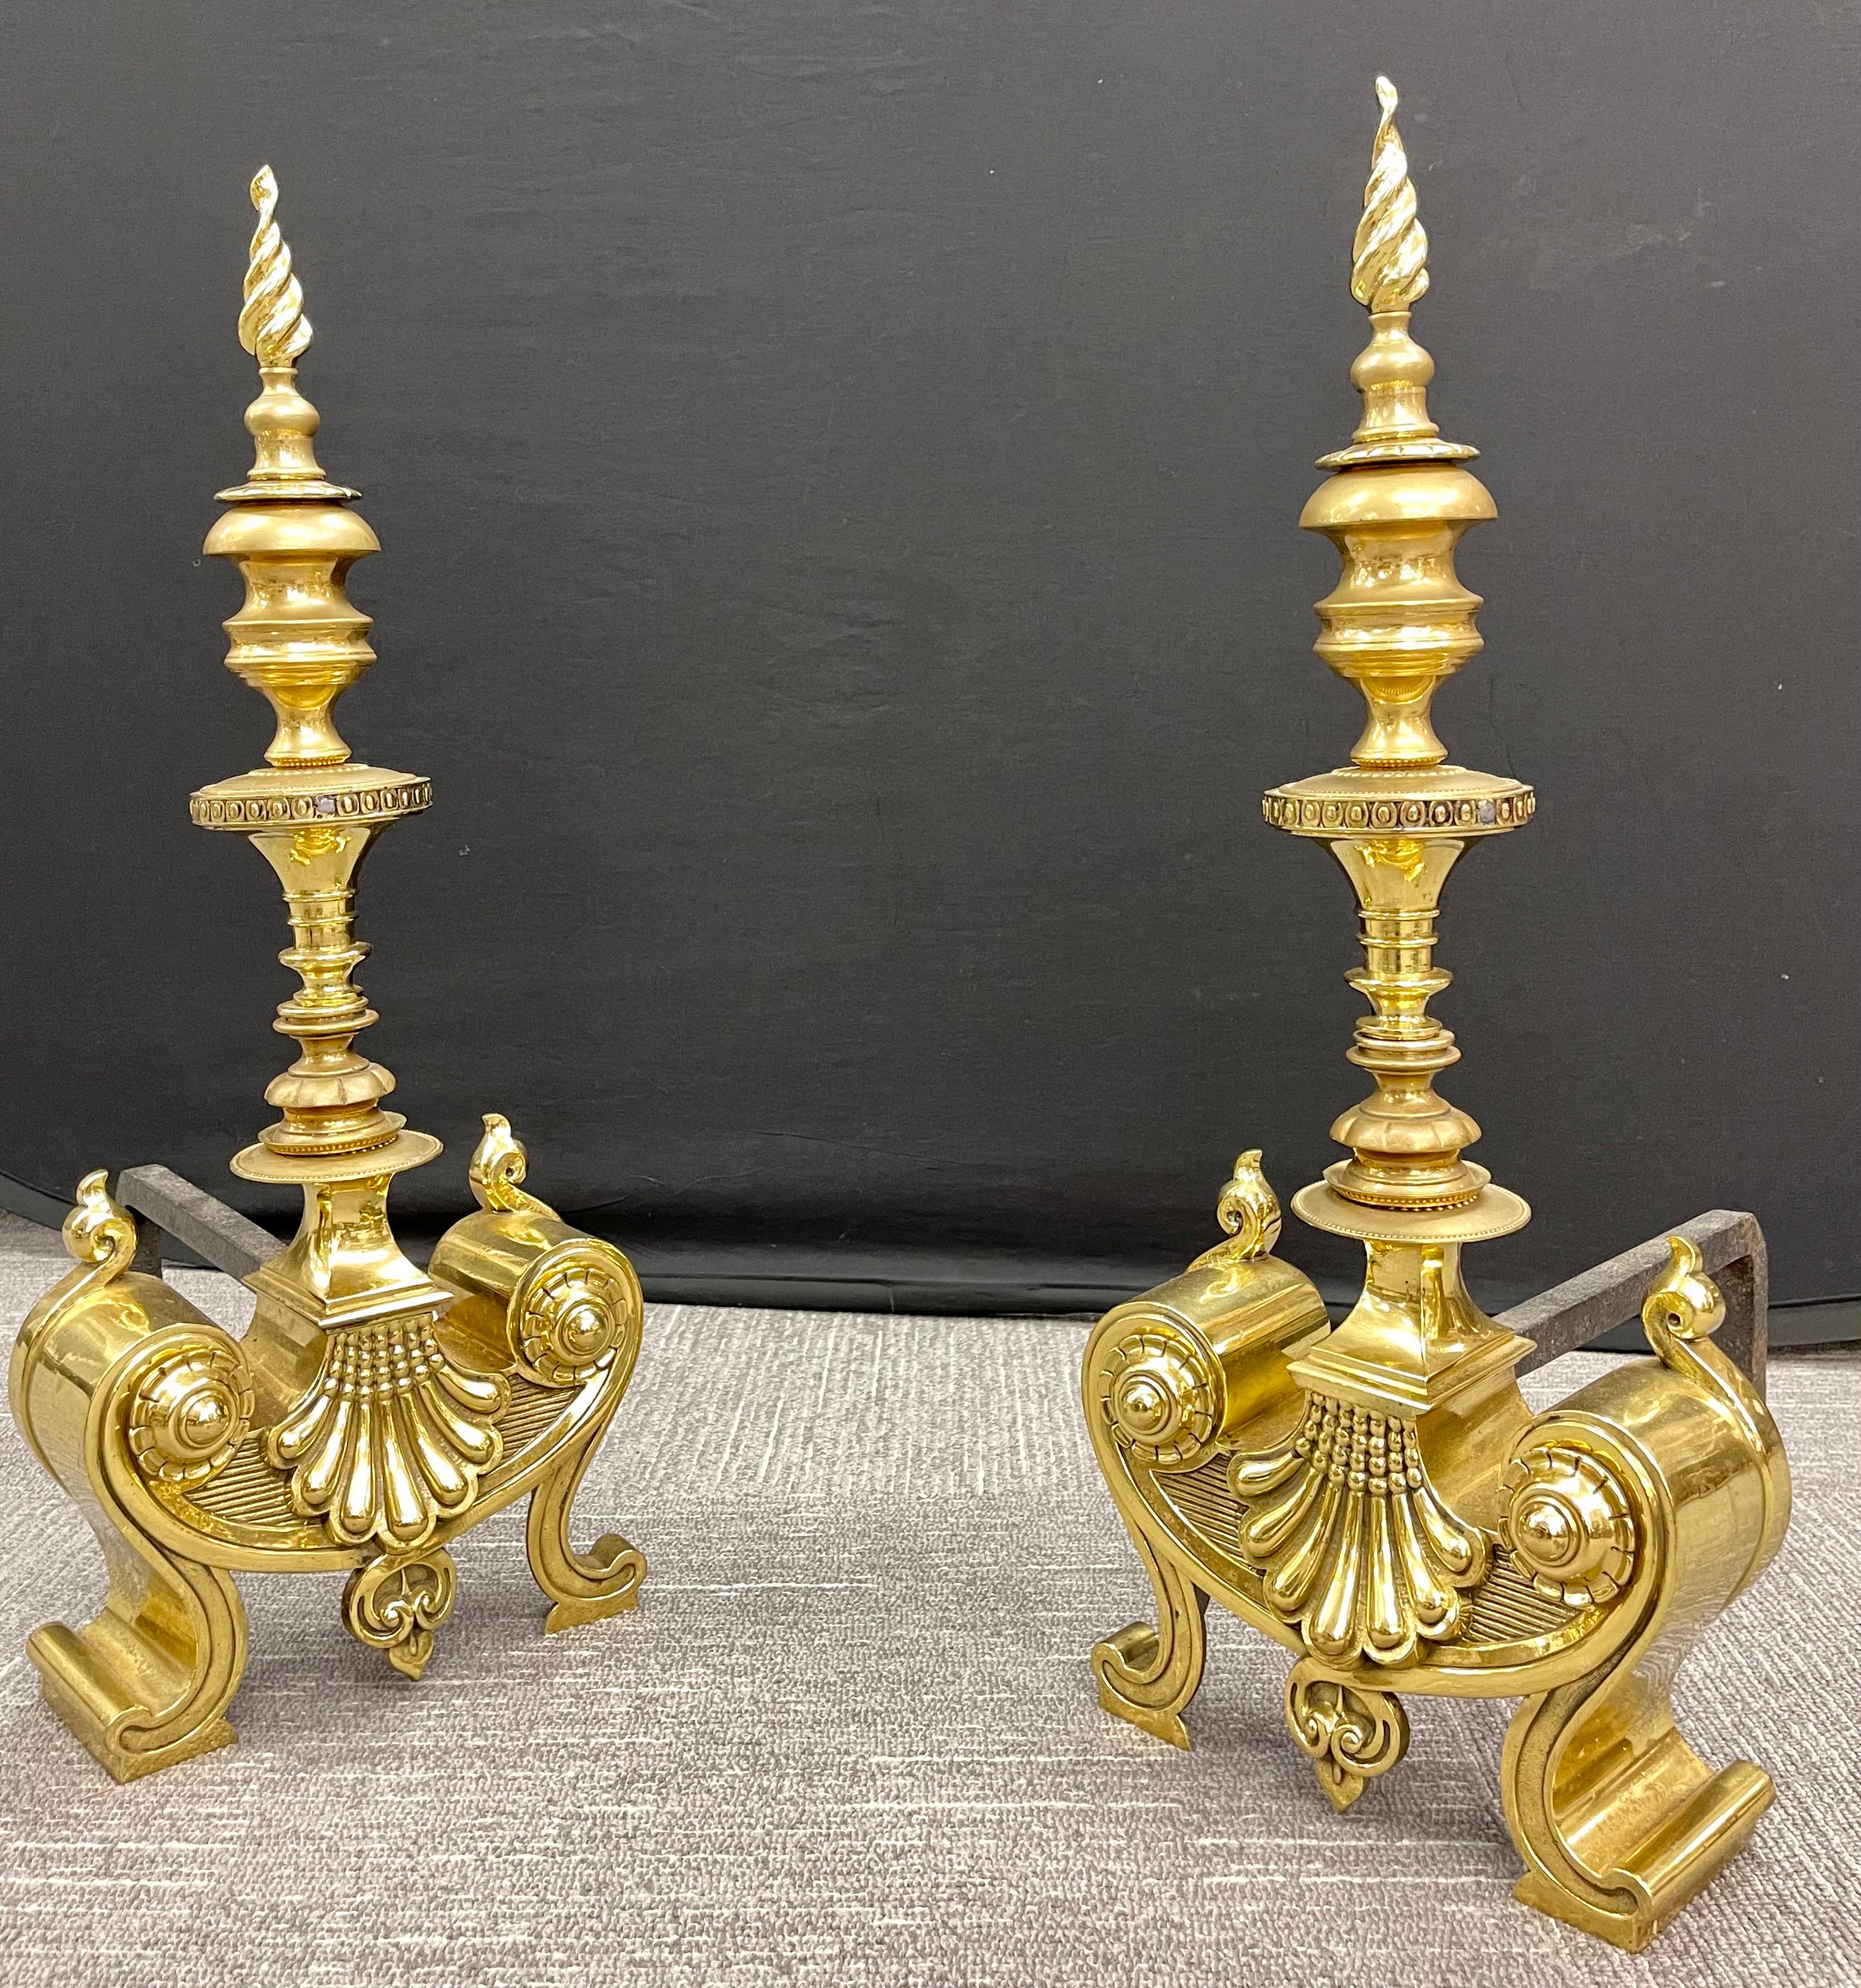 Pair of bronze andirons. Large and impressive andirons having been polished. Louis XVI in style having a flame top supported by a column center stem leading to a very decorative base of shell design.